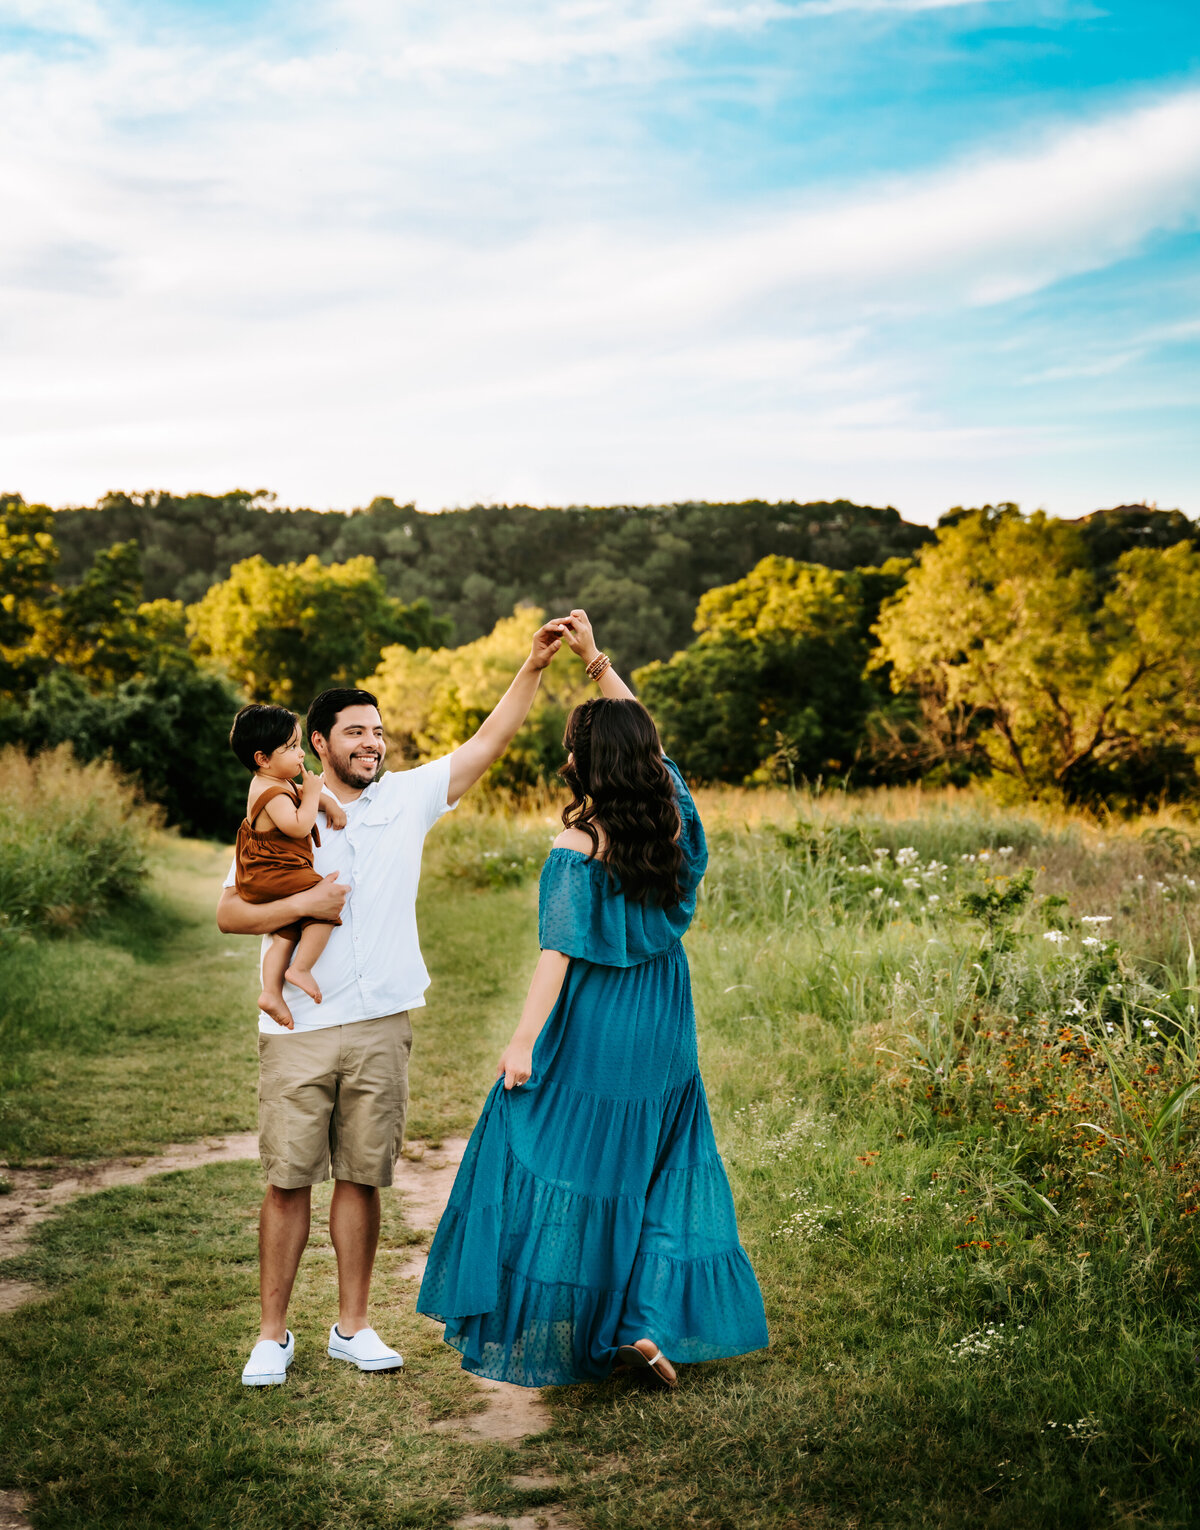 Family Photographer, a father holds his child, and spins his wife in a grassy field